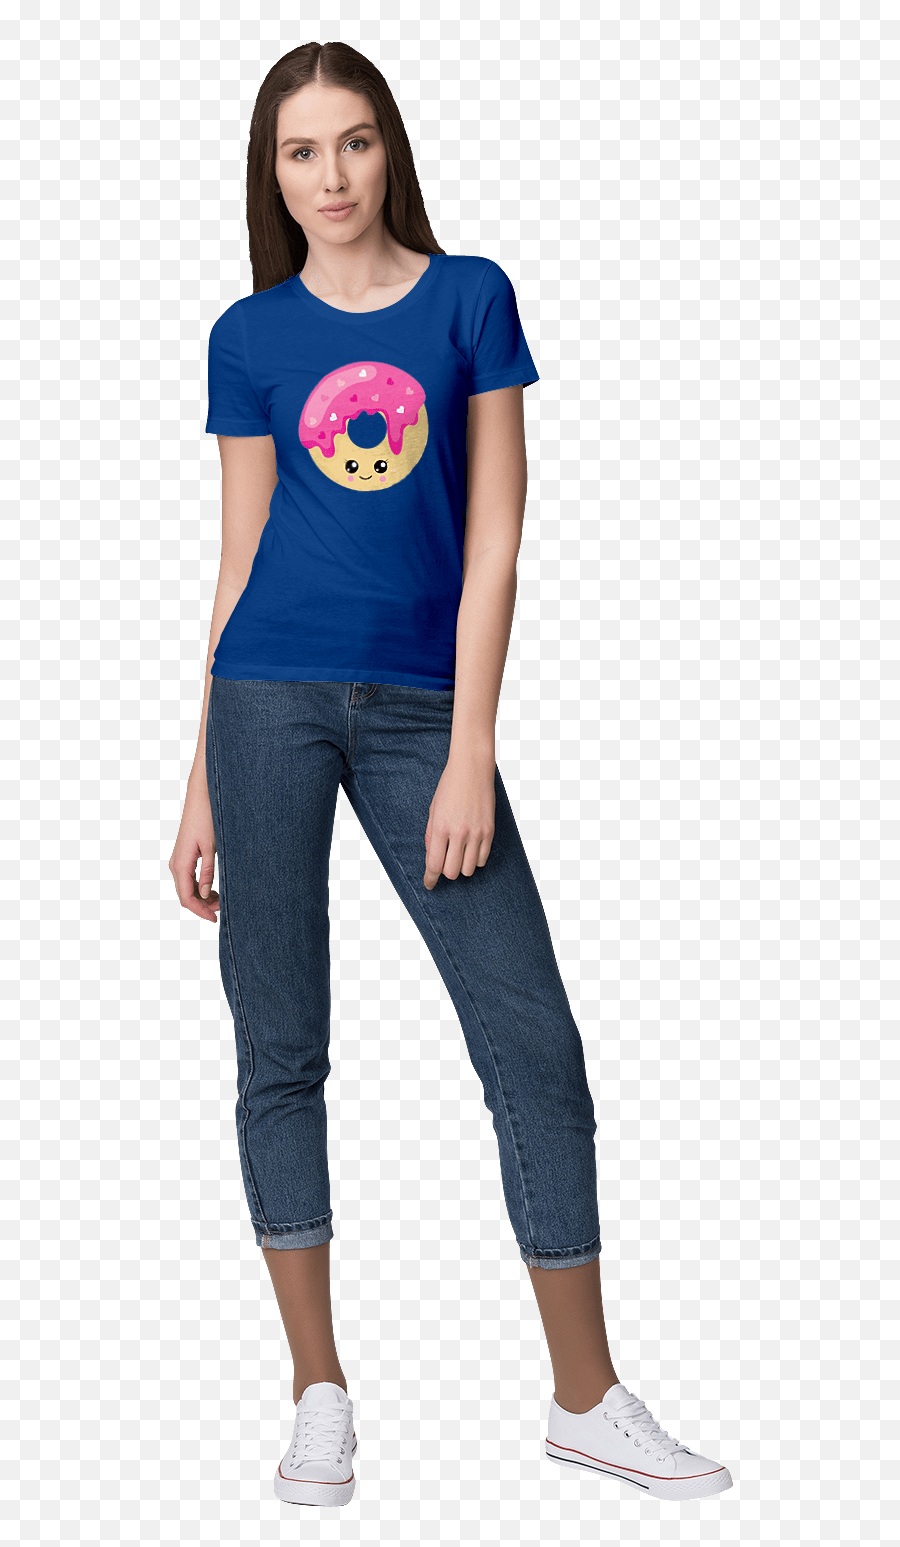 Womenu0027s T - Shirt With Print Pink Donut With A Smile Art Emoji,B3c Emoticon